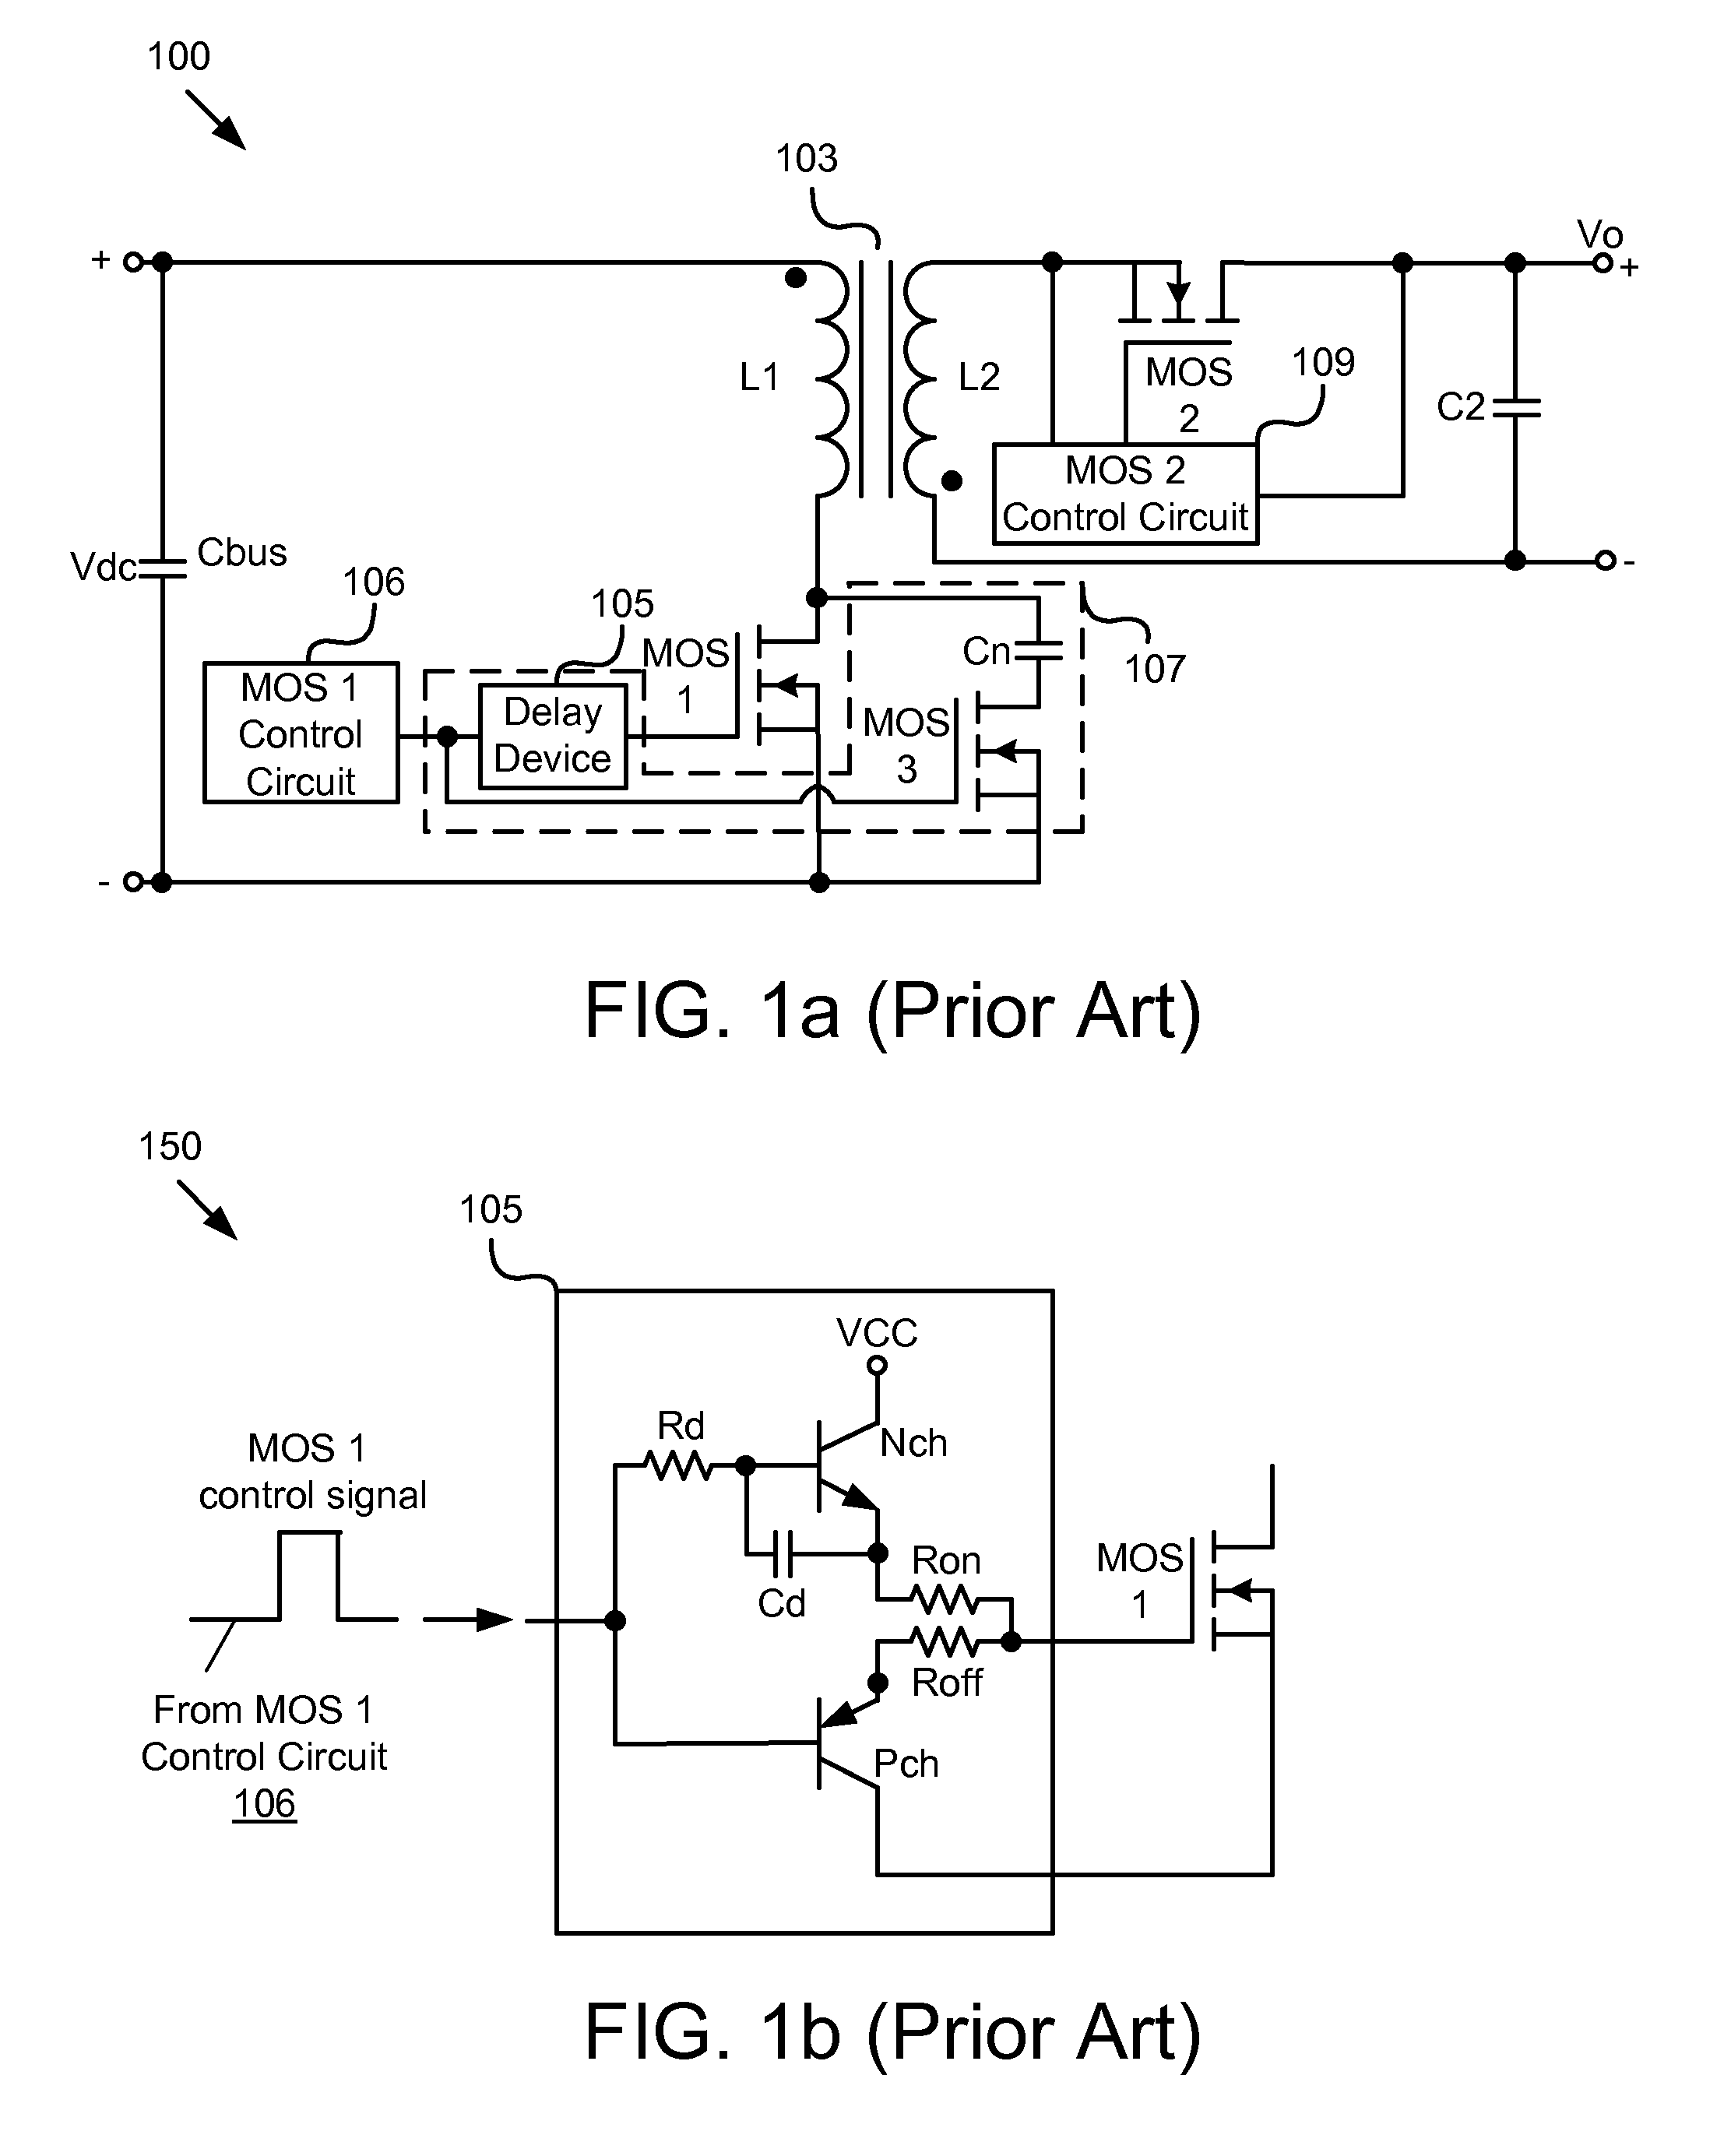 Body diode conduction optimization in mosfet synchronous rectifier